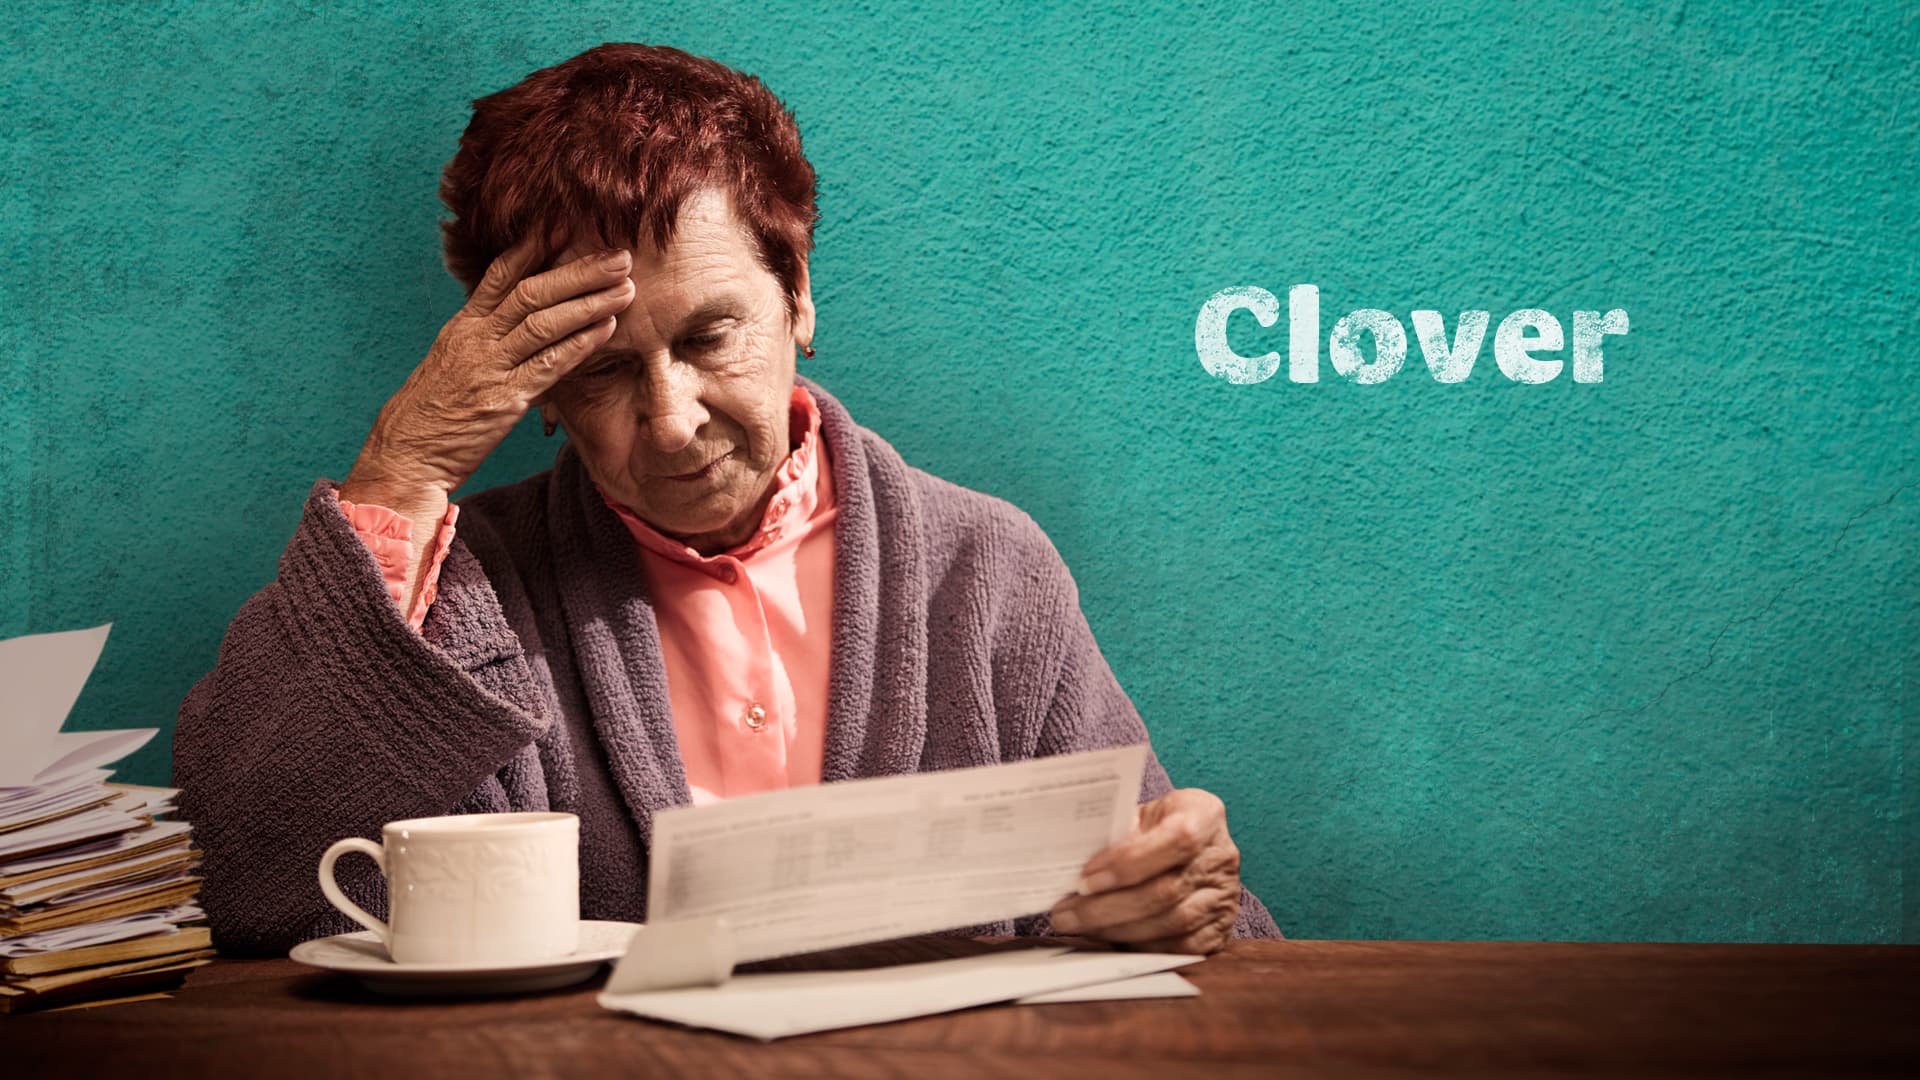 Clover Health insurance start-up angered customers, missed ...